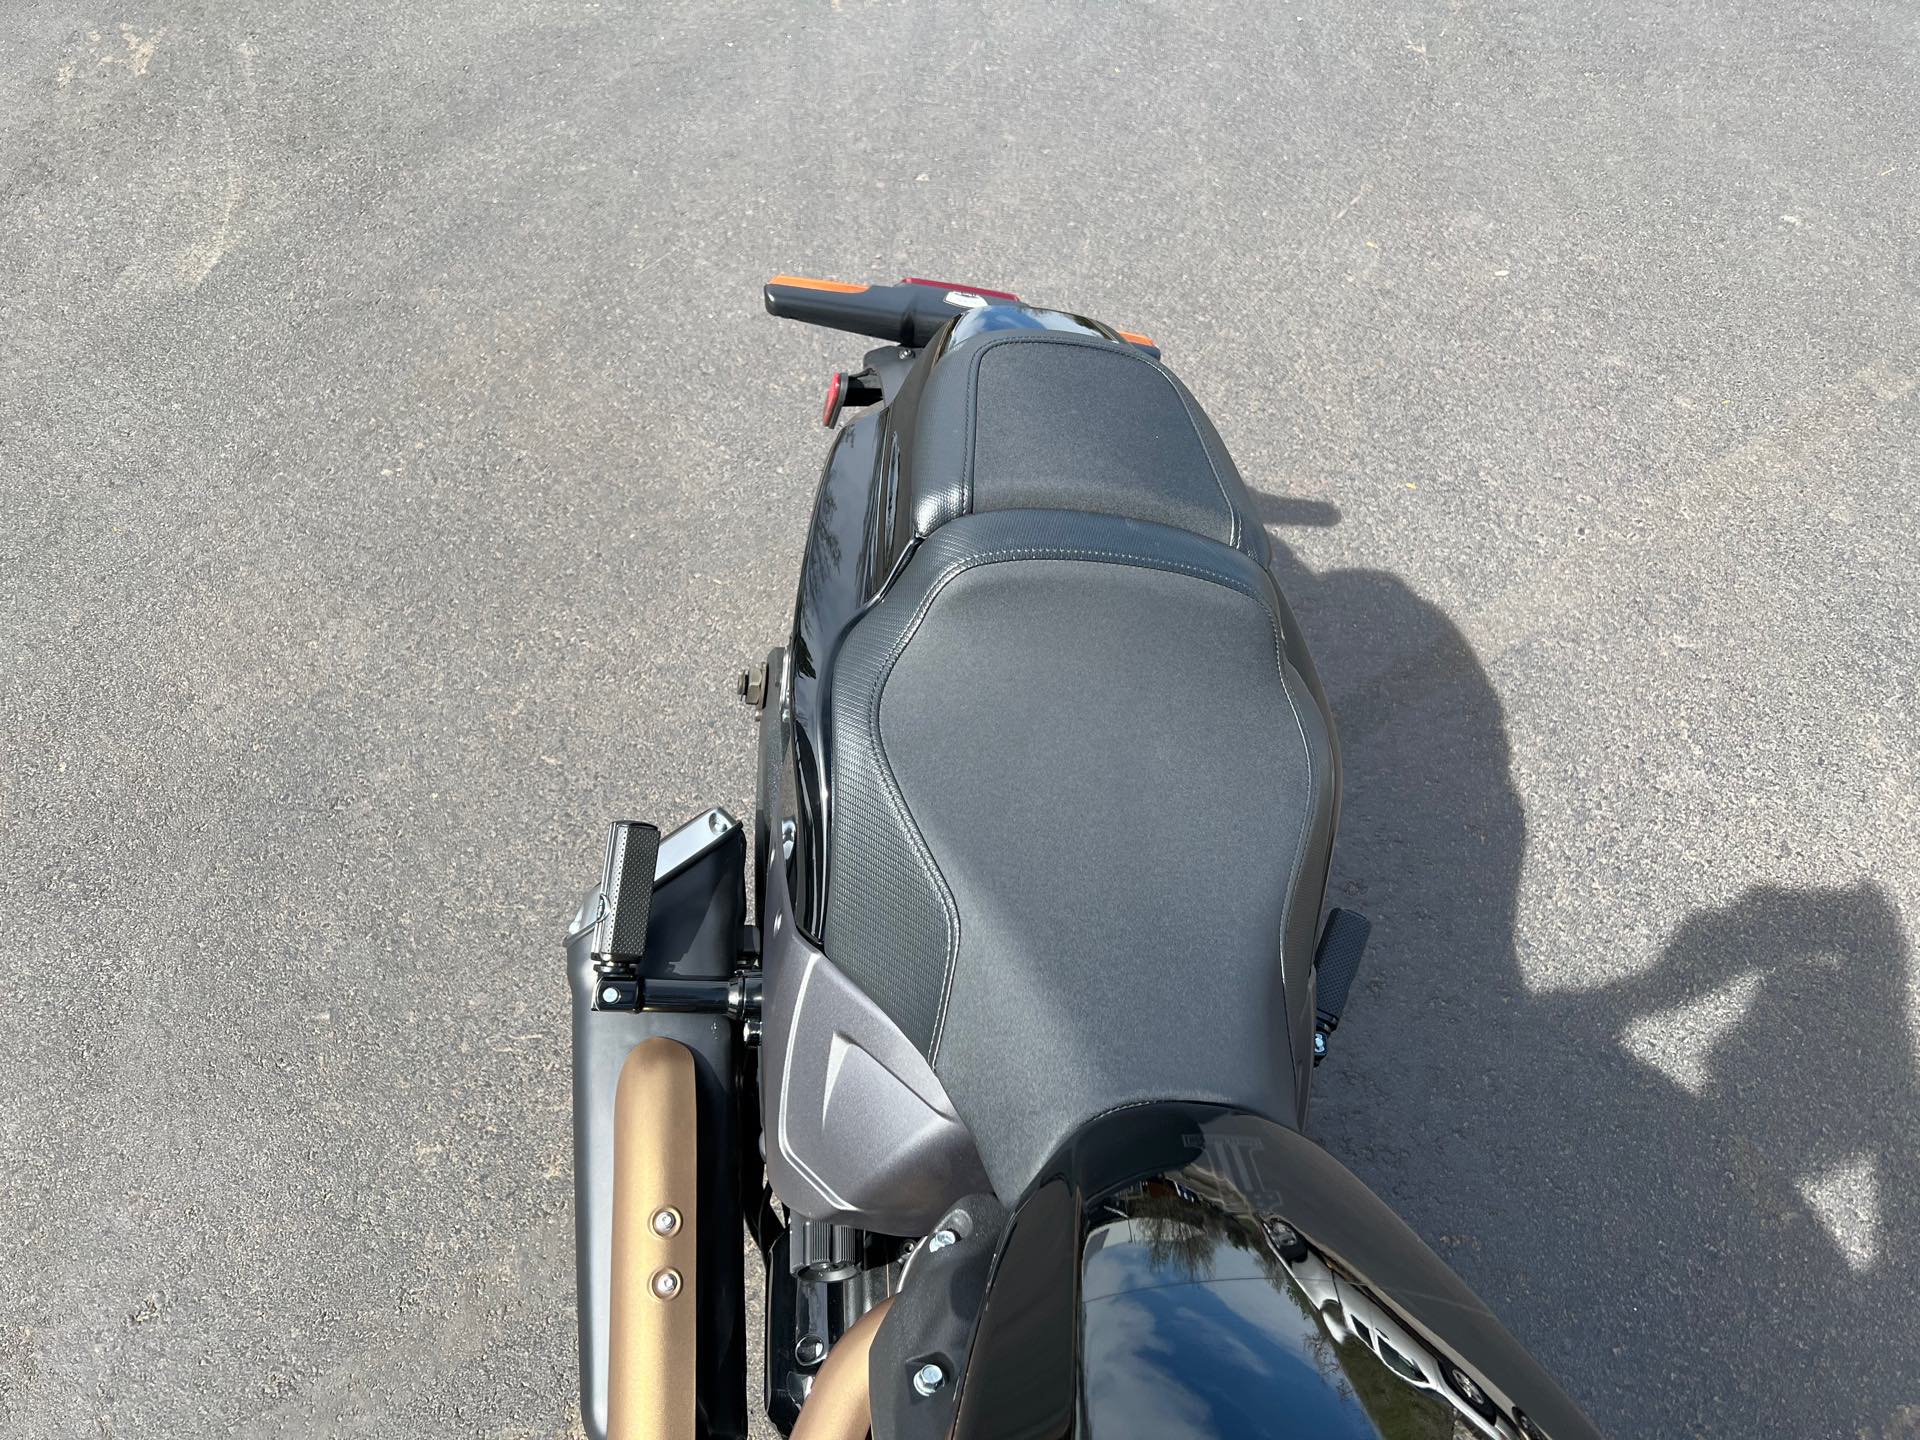 2019 Harley-Davidson Softail FXDR 114 at Aces Motorcycles - Fort Collins